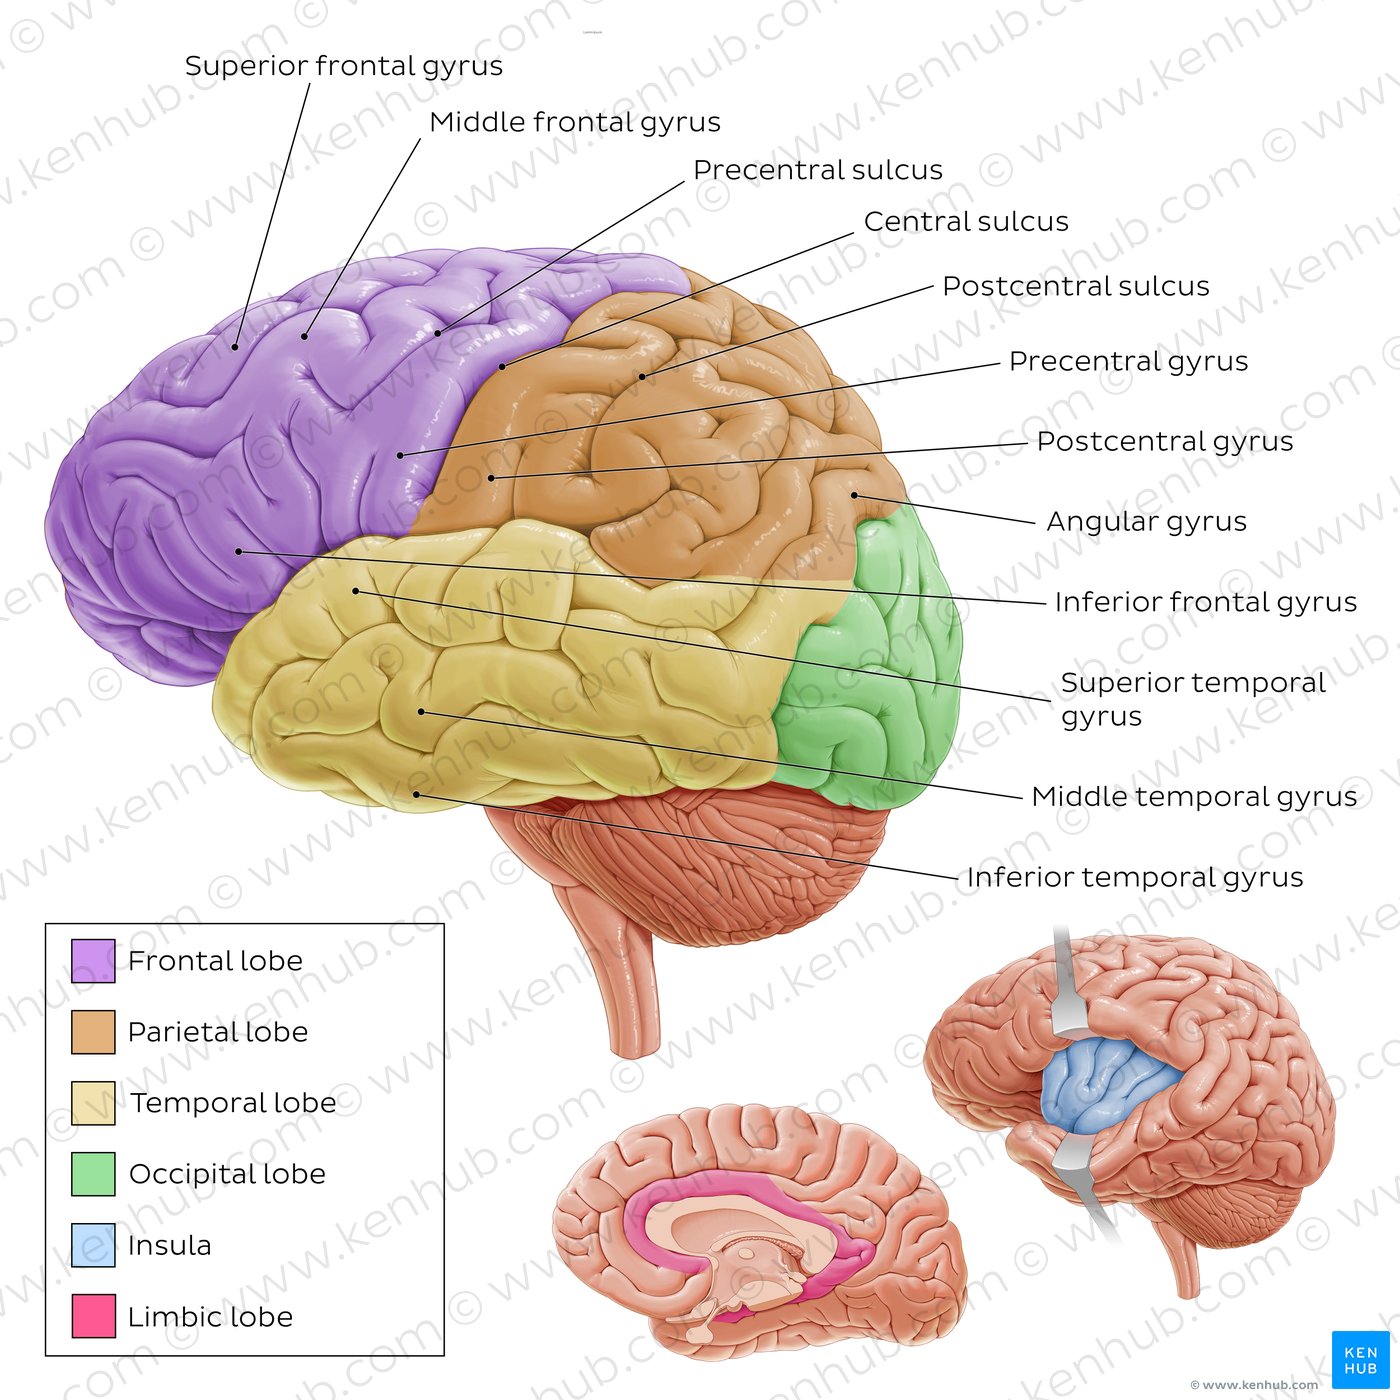 Lateral views of the brain - labeled diagram